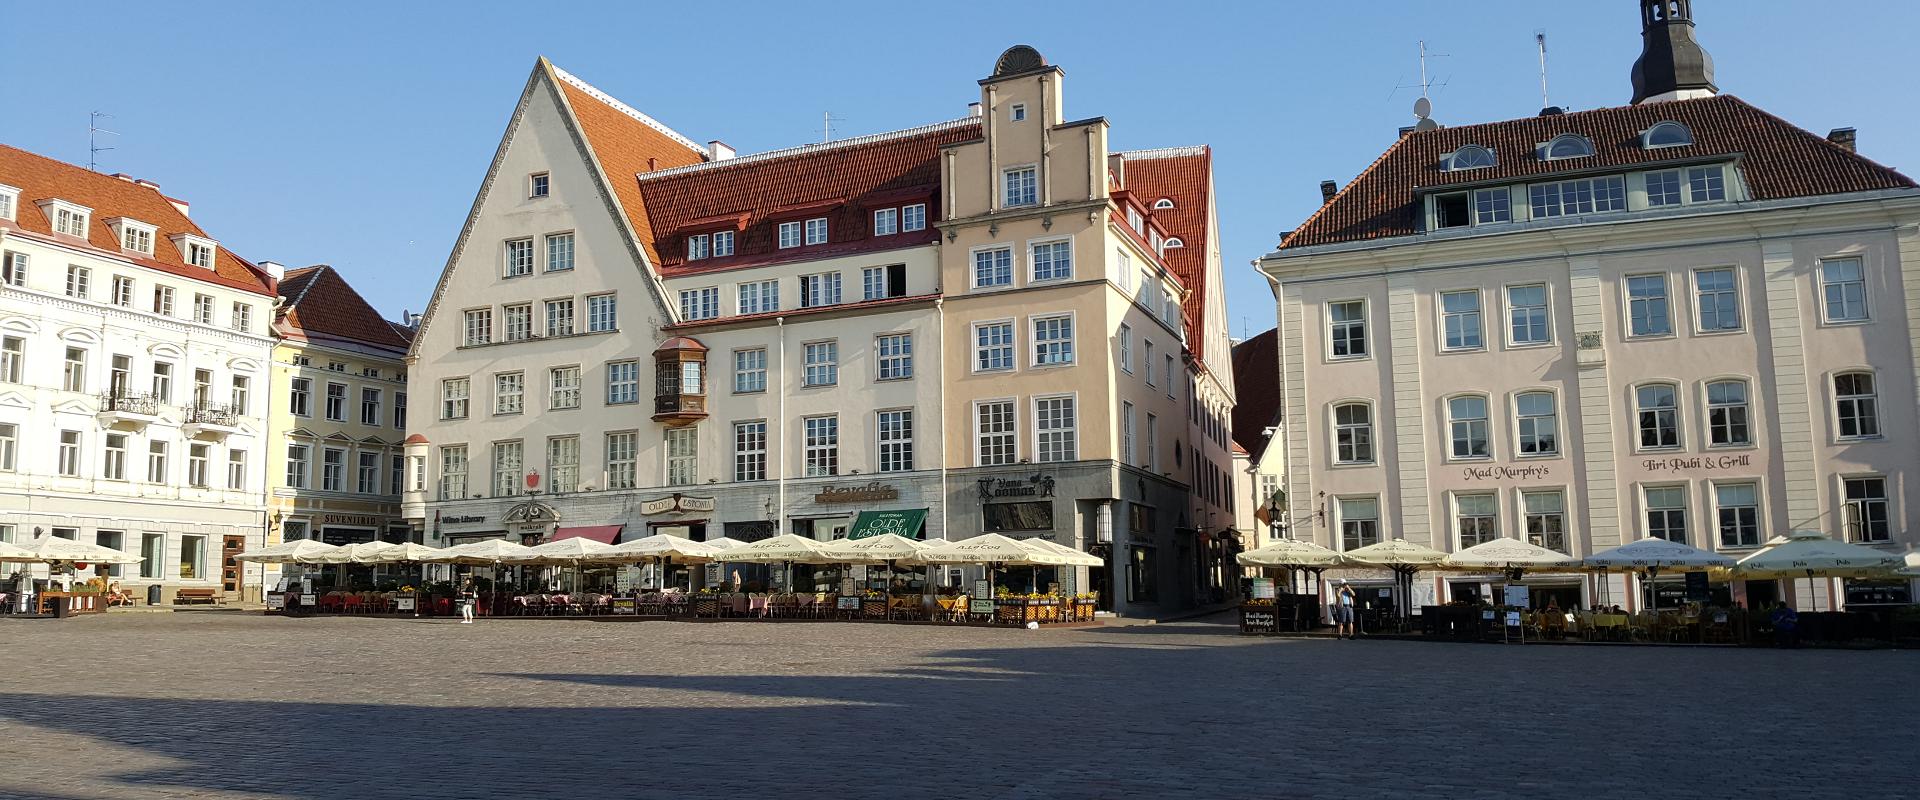 Guided Walking Tour in Tallinn's Old Town